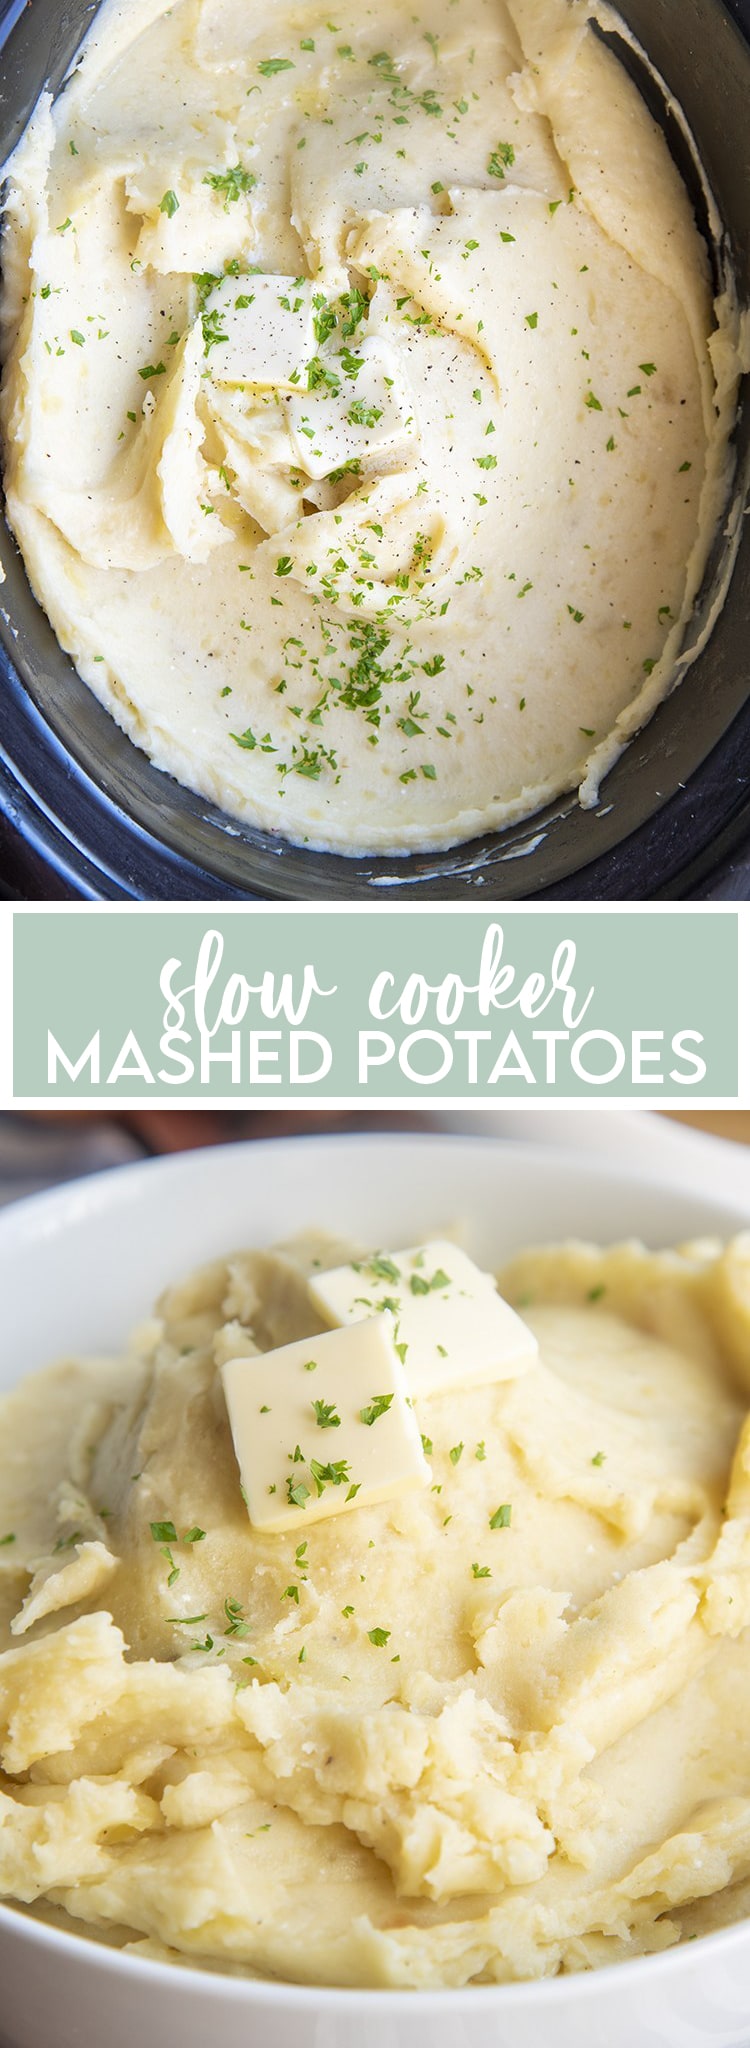 A collage of two photos of mashed potatoes made in the slow cooker. The first is the potatoes in the slow cooker.